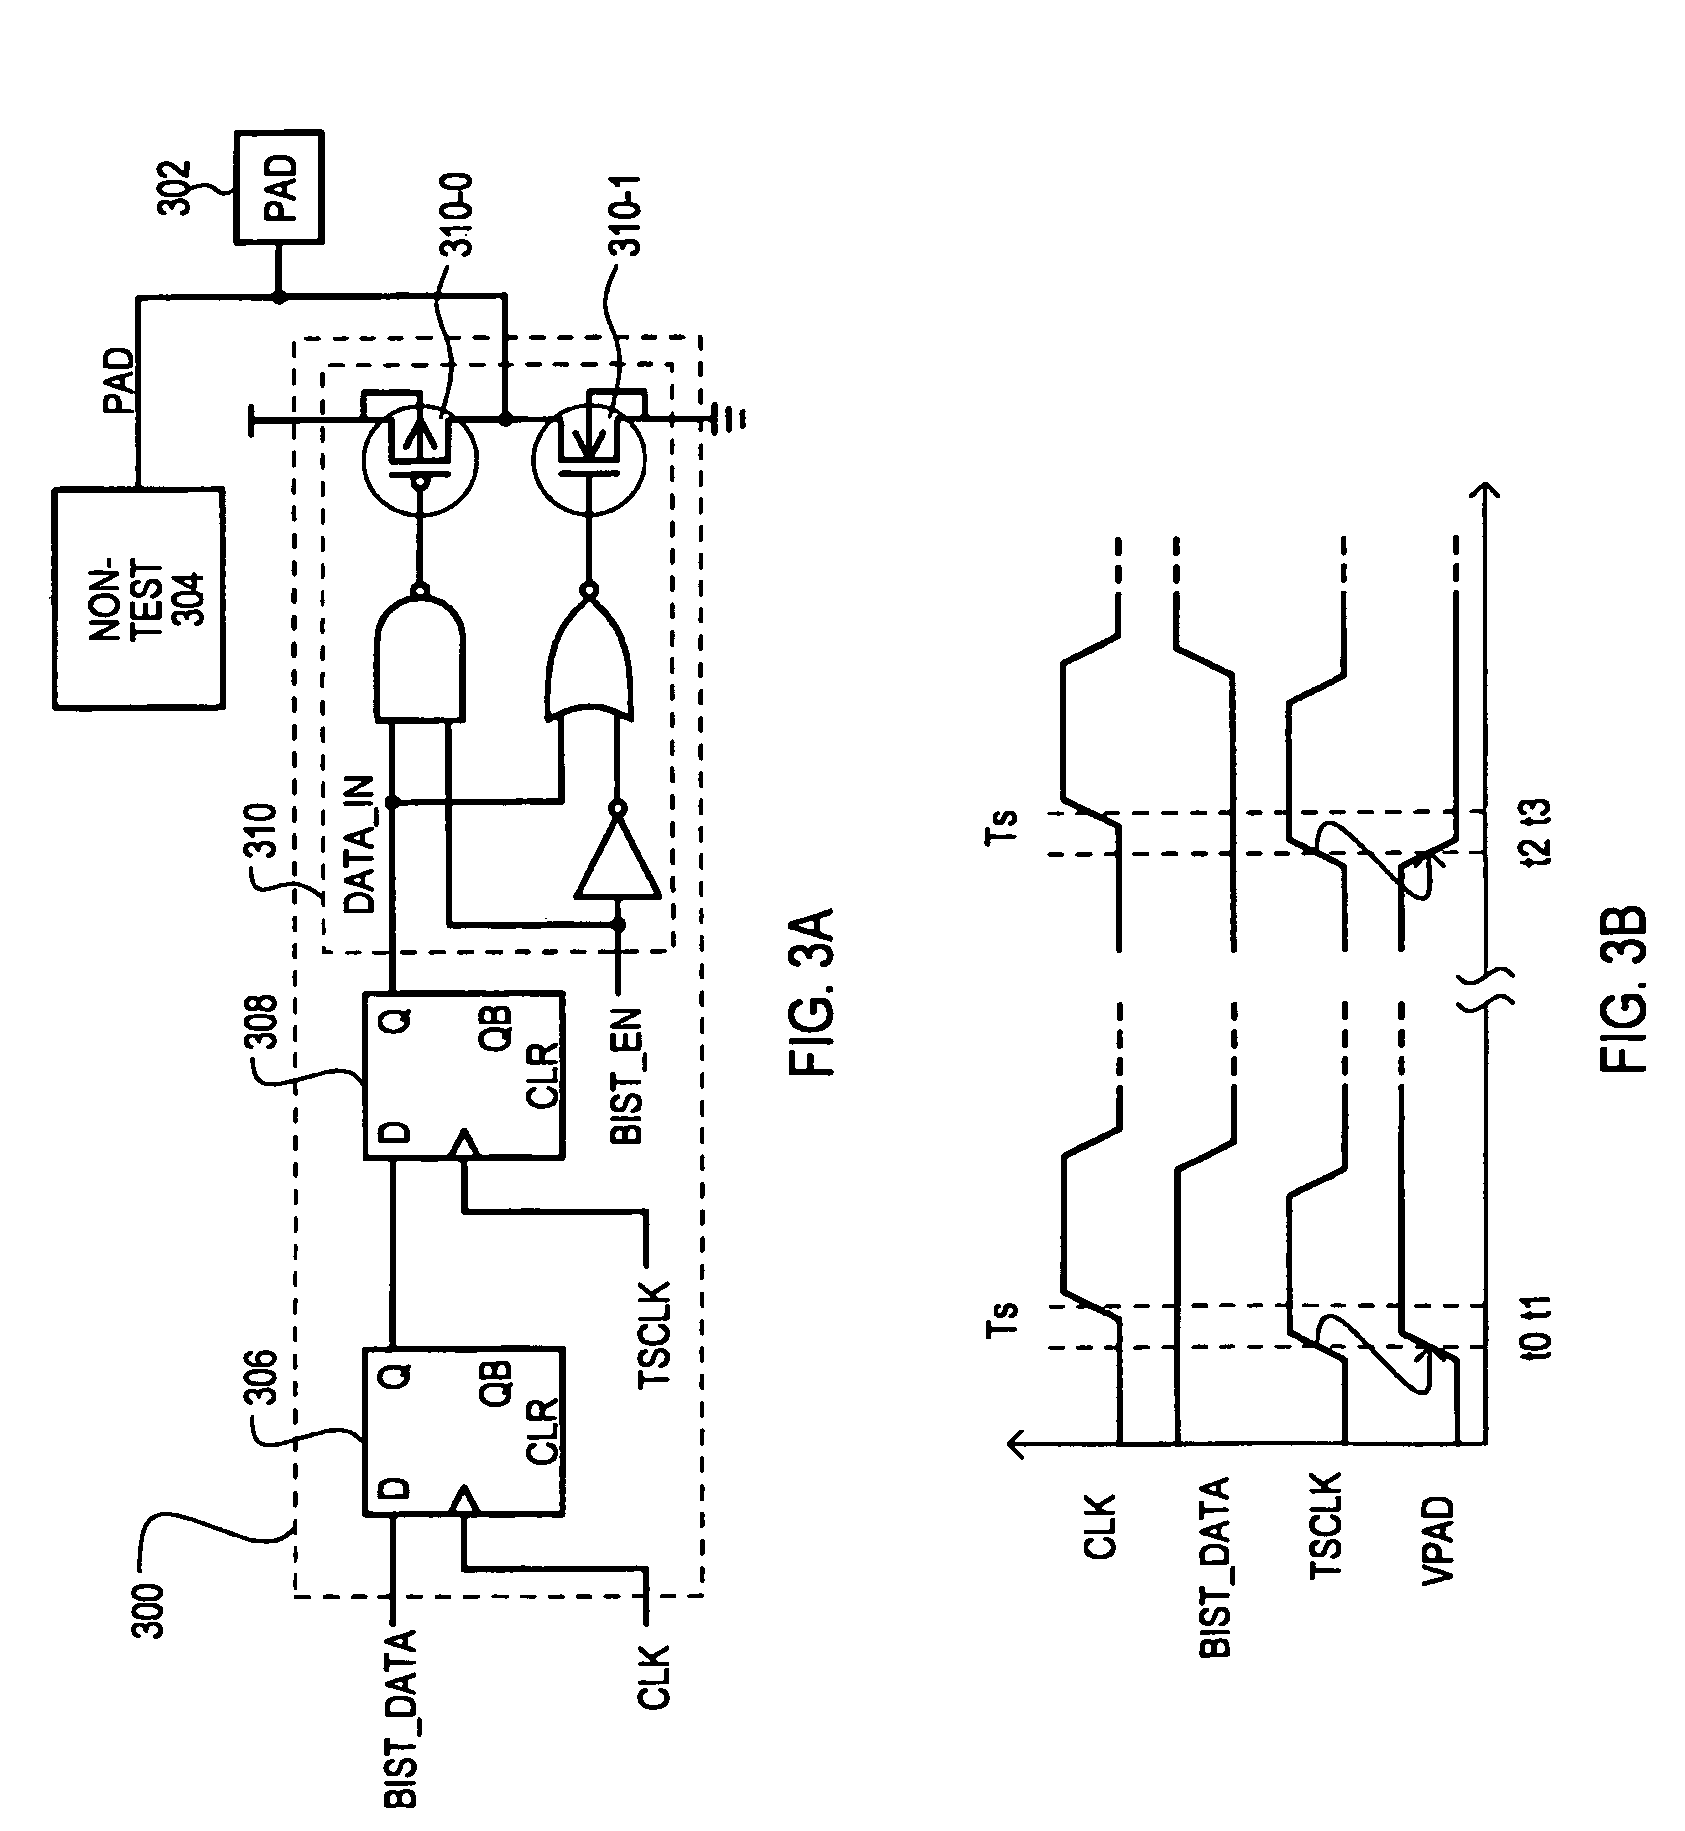 Method and apparatus for built-in self-test (BIST) of integrated circuit device